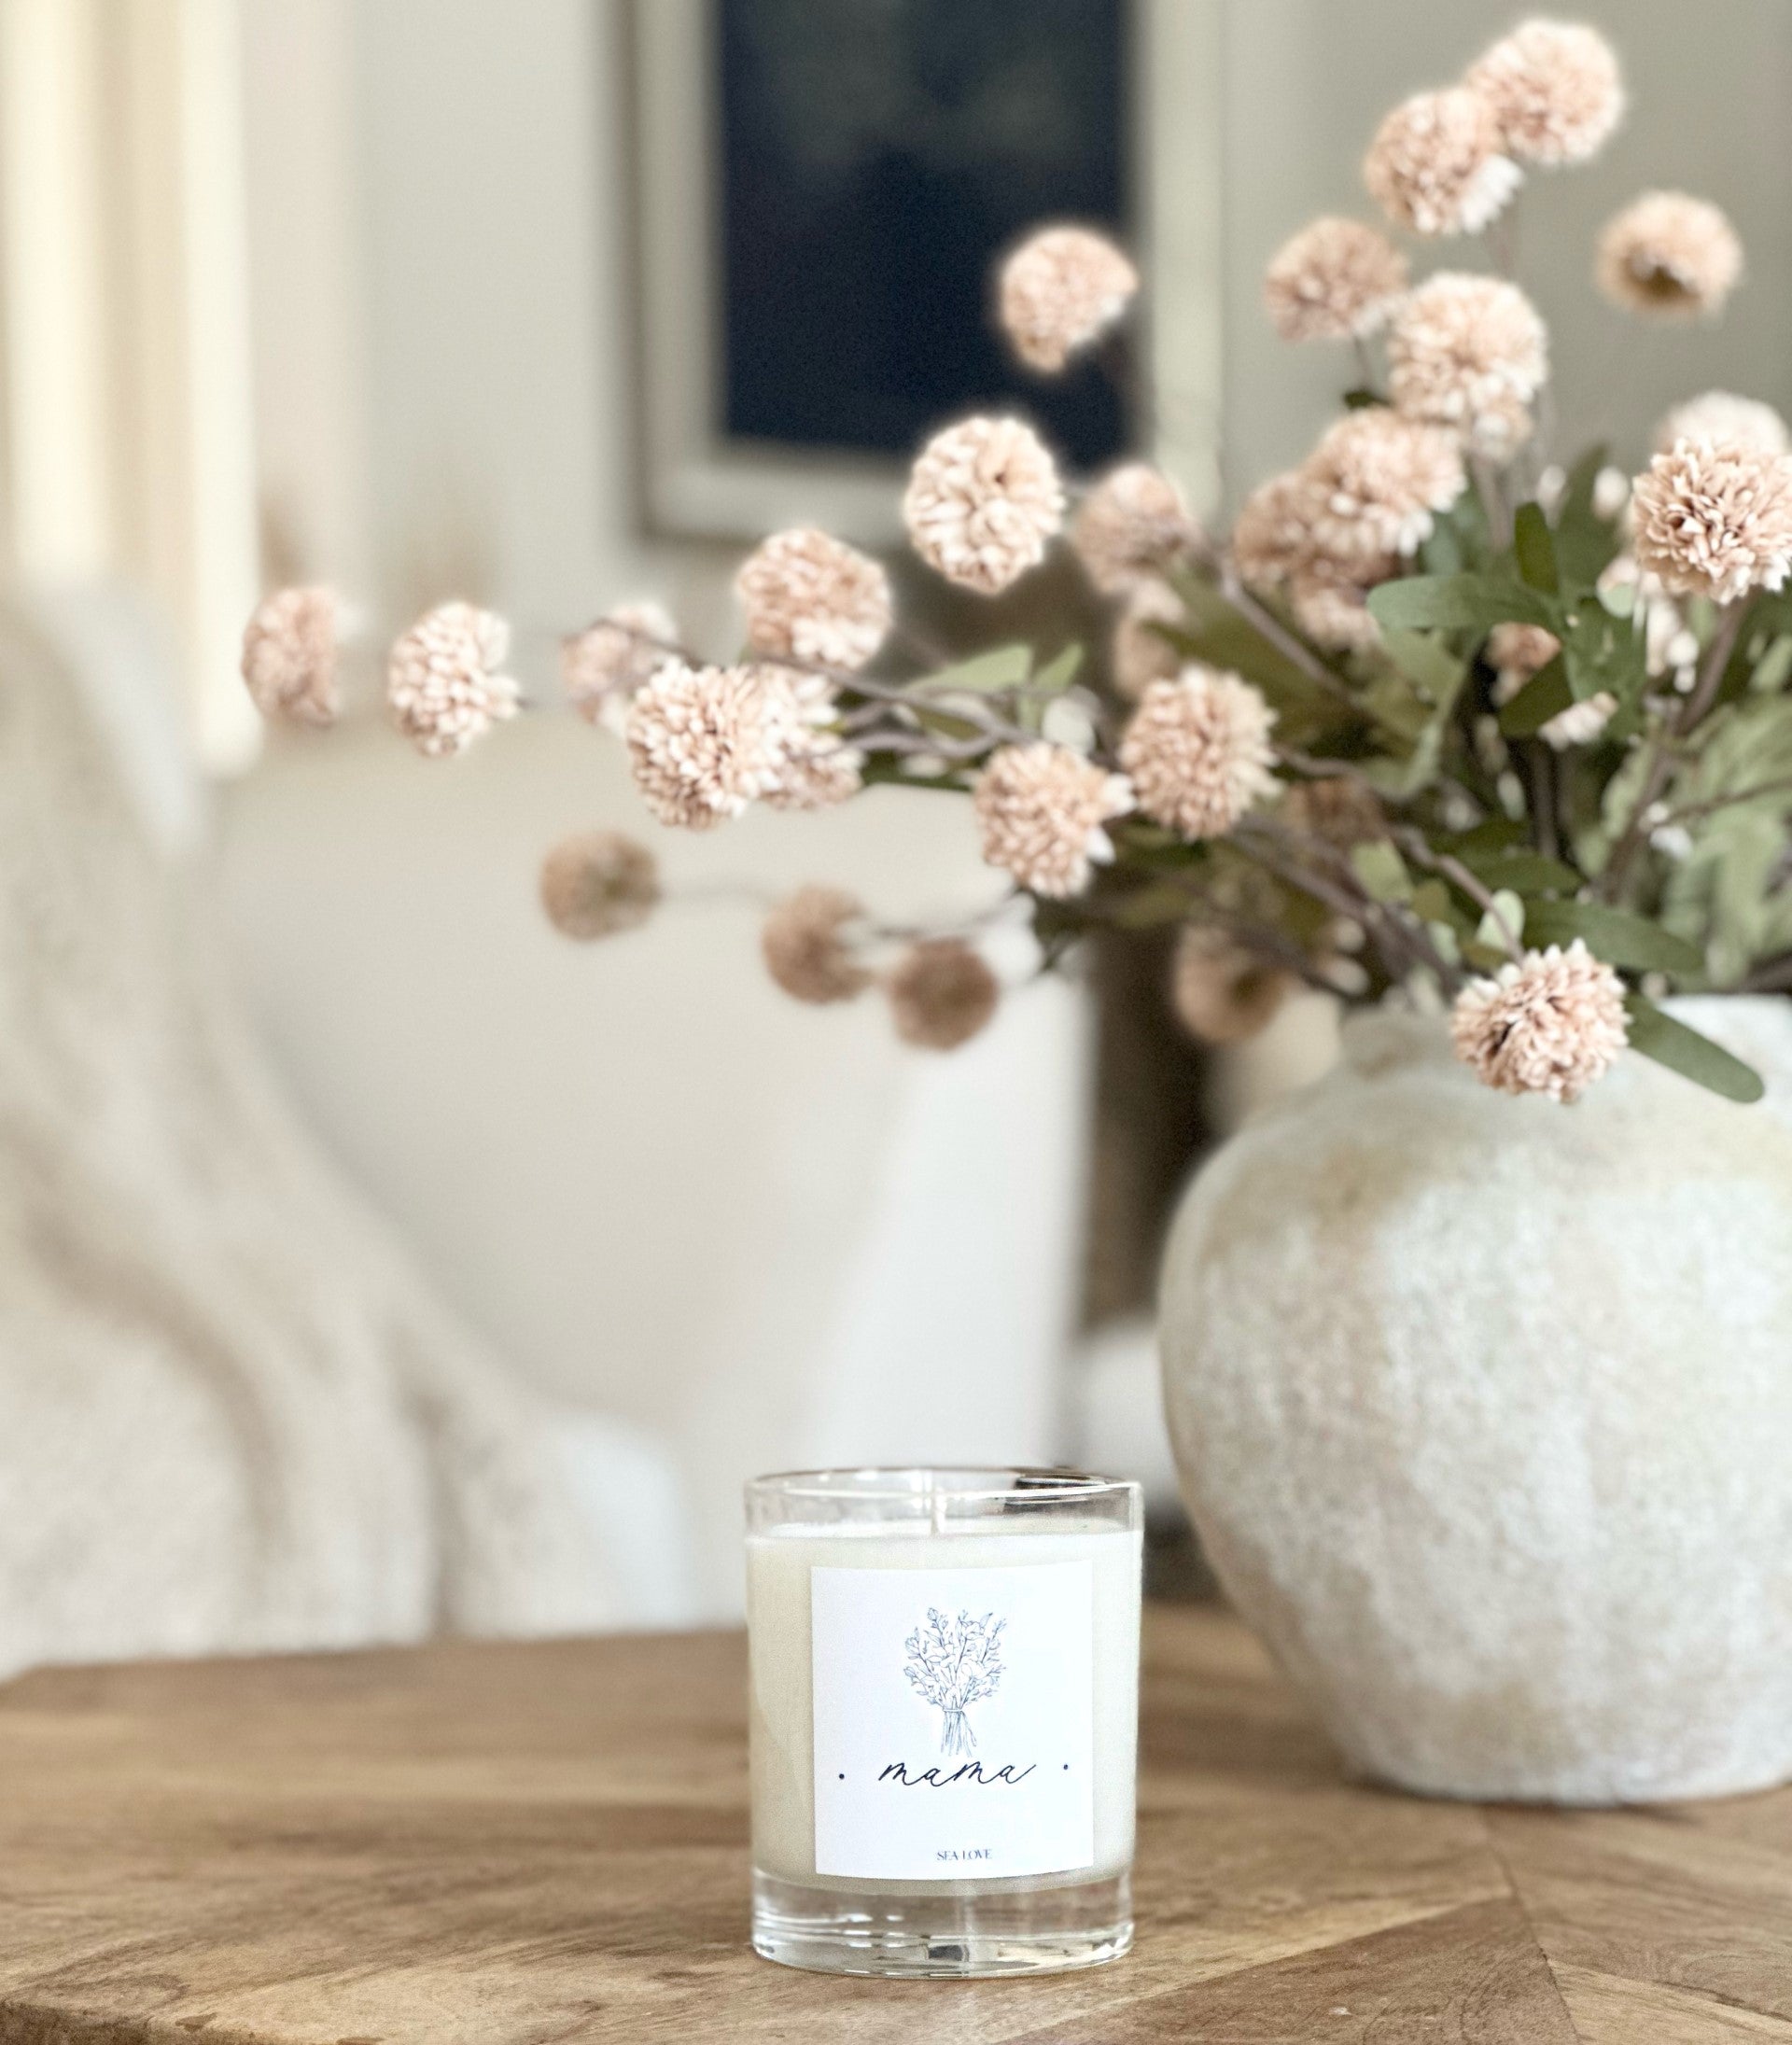 A scented candle with a simple label "mama" on a wooden table, framed by a vase of delicate pink flowers in the softly blurred background, creating a cozy atmosphere.